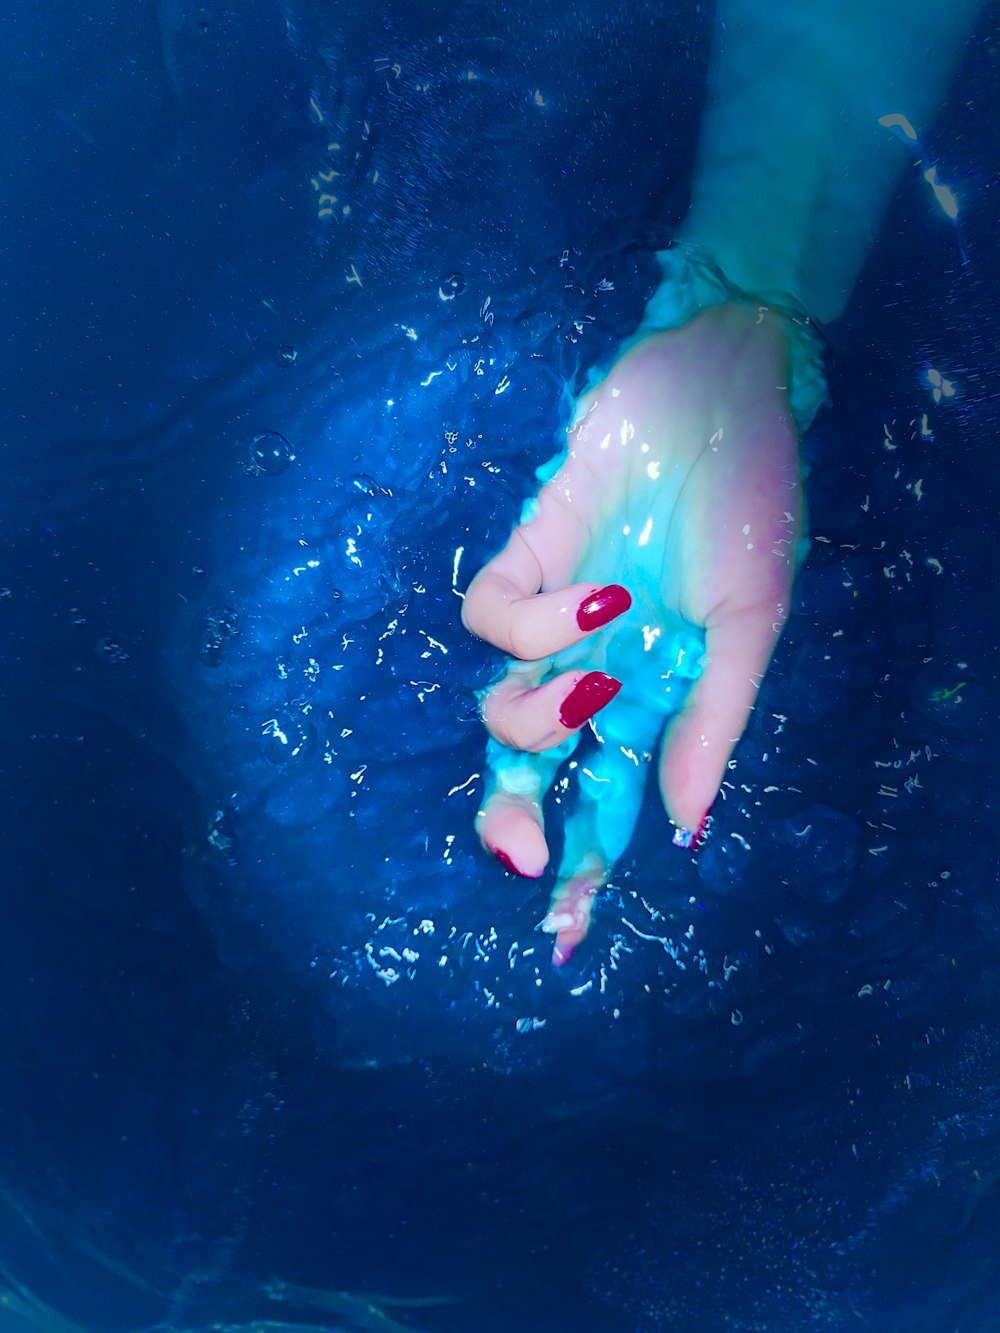 a person's hand in the water with red nail polish